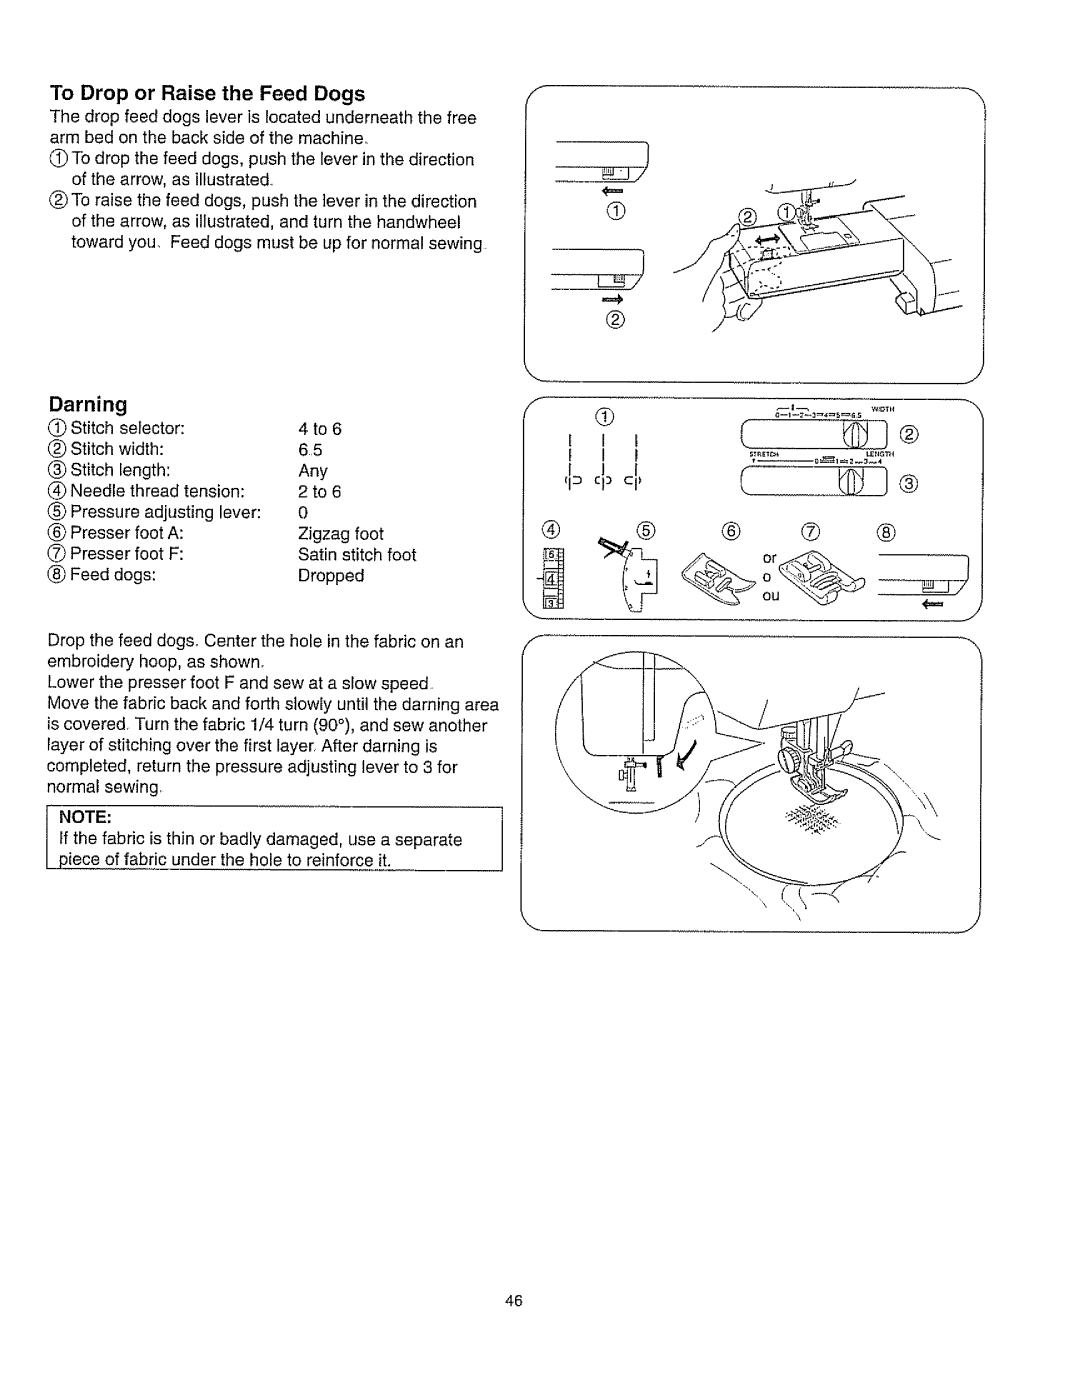 Kenmore 385.162213 owner manual Darning, To Drop or Raise the Feed Dogs, I Ote 